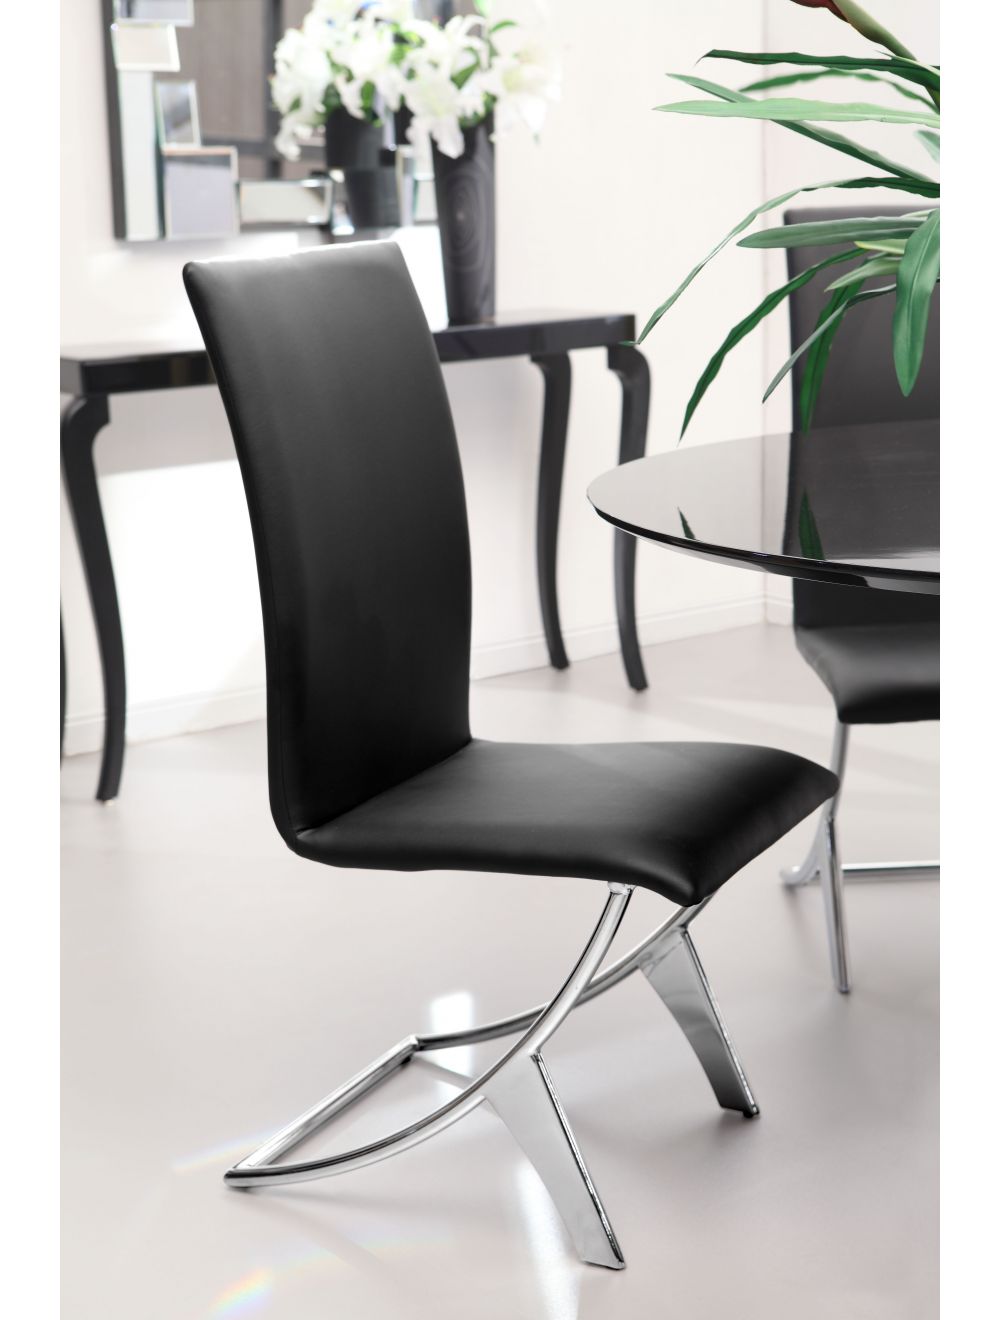 Delfin Dining Chair (Set of 2) Black